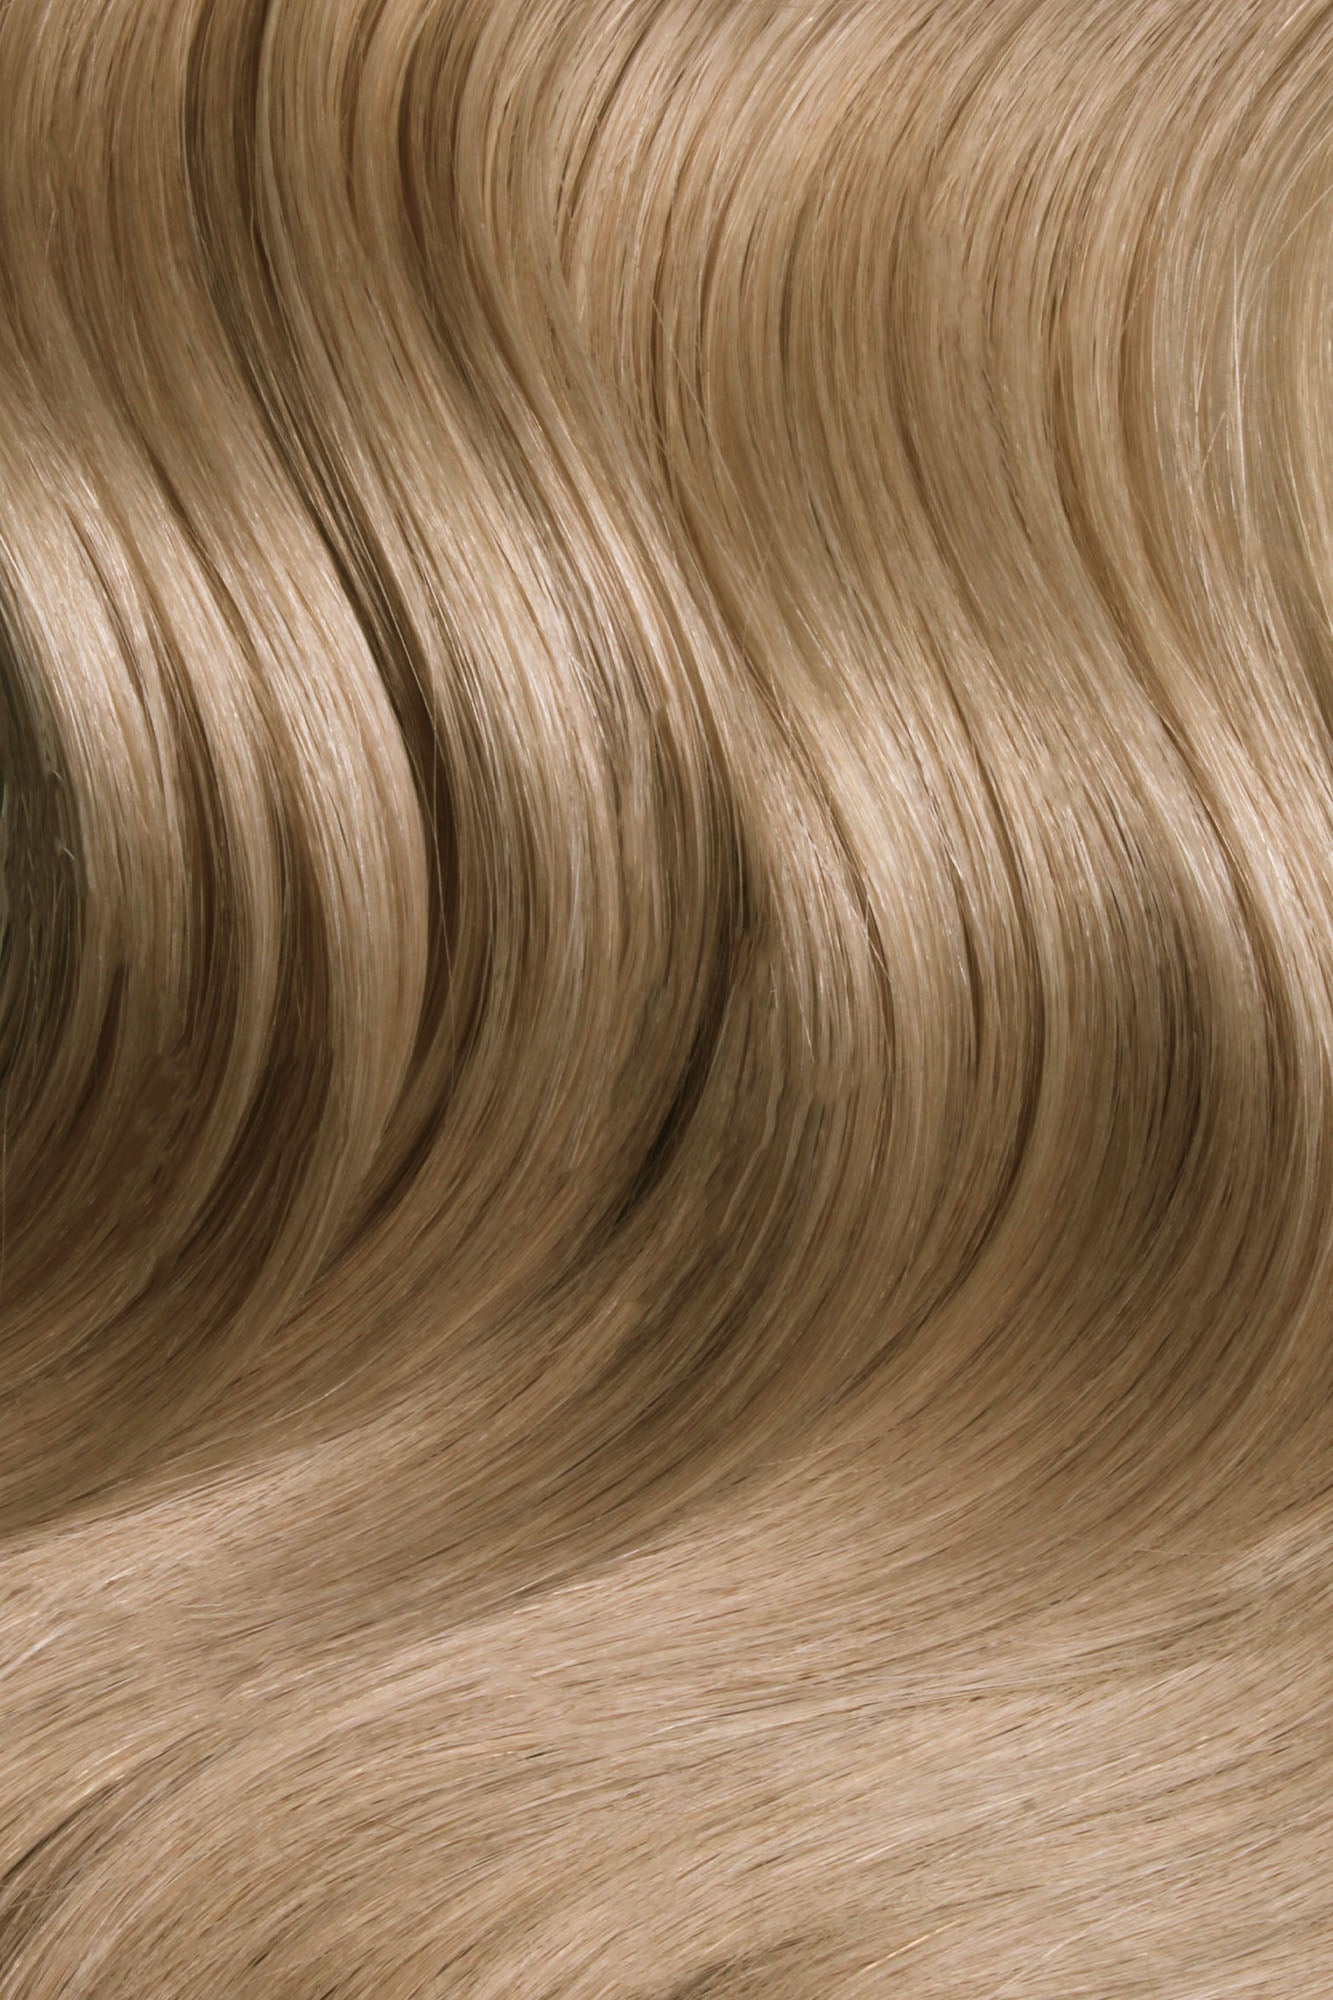 Nano Bonds 24 Inches - SWAY Hair Extensions Ash-Blondette-7-20 Ultra-fine, invisible bonds for a flawless, natural look. 100% Remy Human hair, lightweight and versatile. Reusable and perfect for individual or salon use.